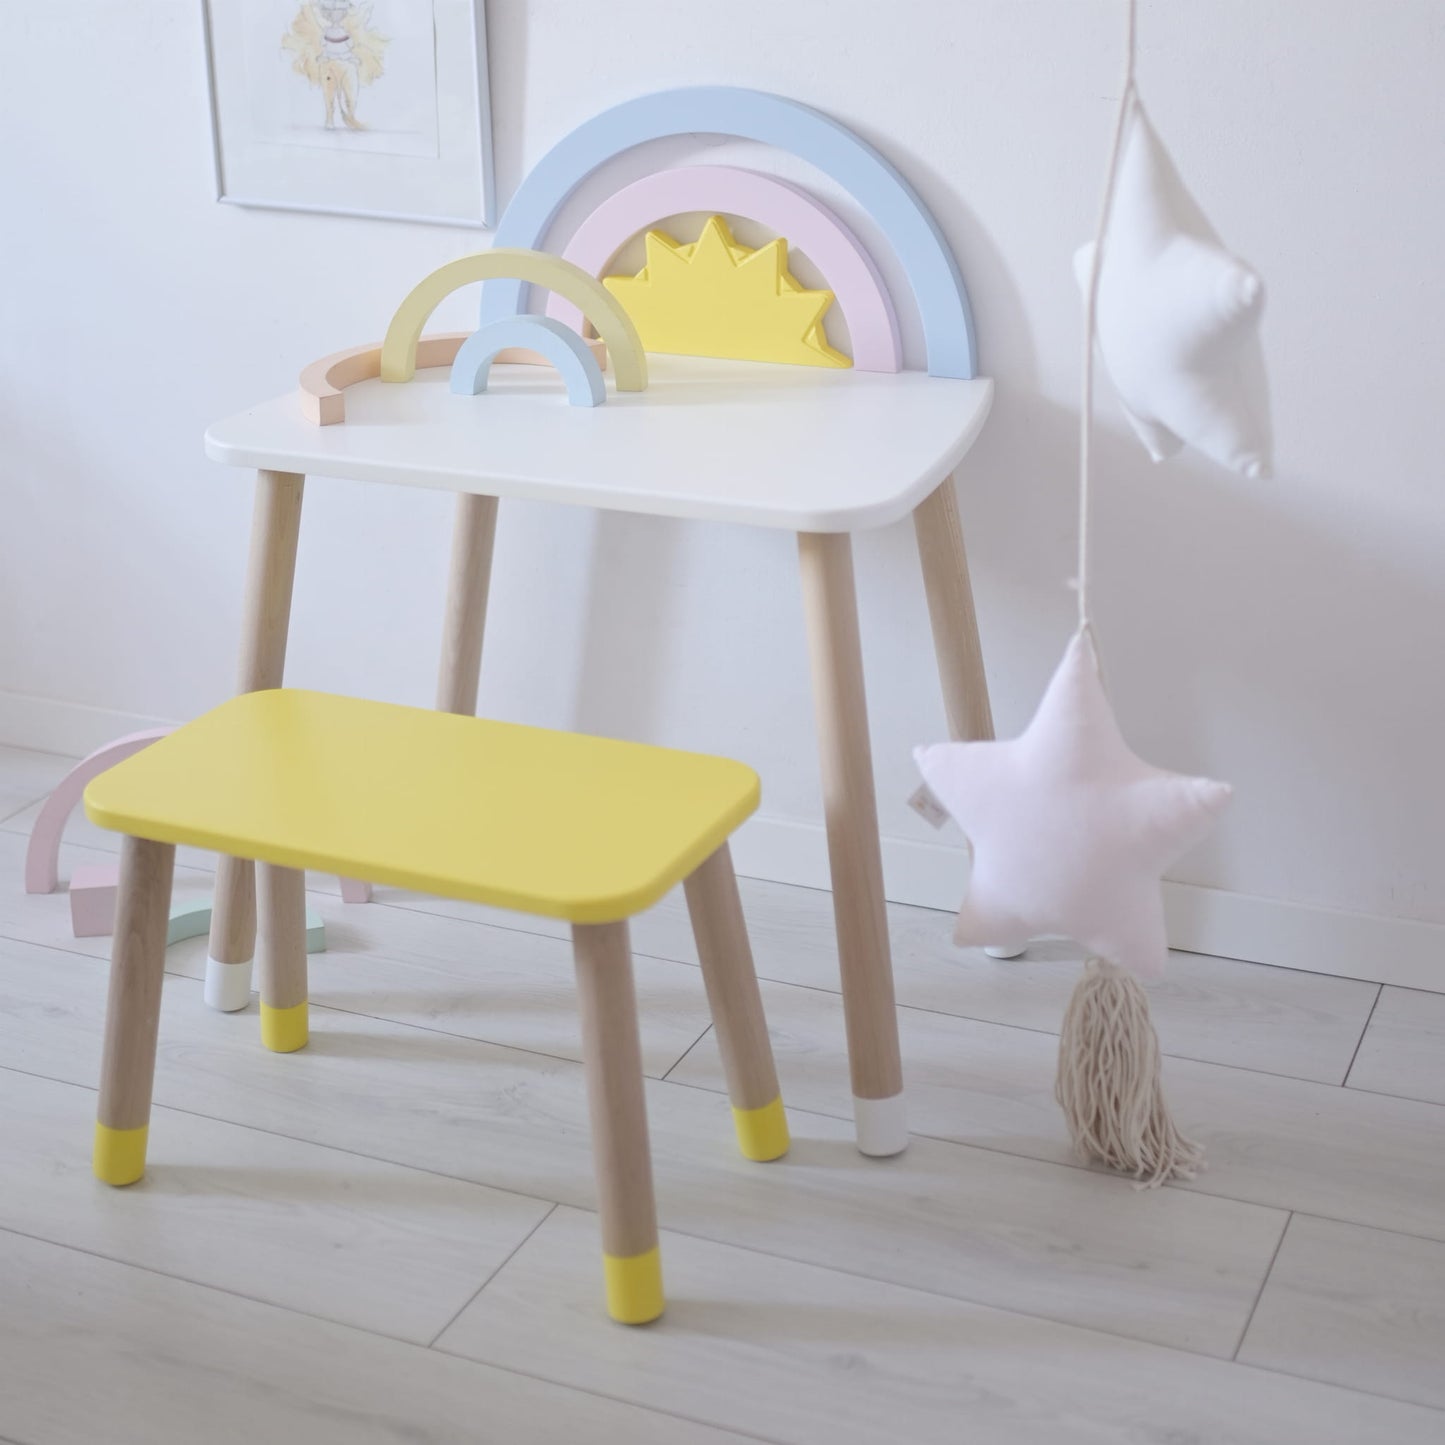 Toddler play table, Kid's activity table,Table and Chair Set, Children Room, Girls furniture,Dressing Table, vanity table, sensory table, kids craft table, gift for grandchild, wooden play table, nursery, nursery furnitures, pink furnitures, bear chair, flower mirror, pink table, 